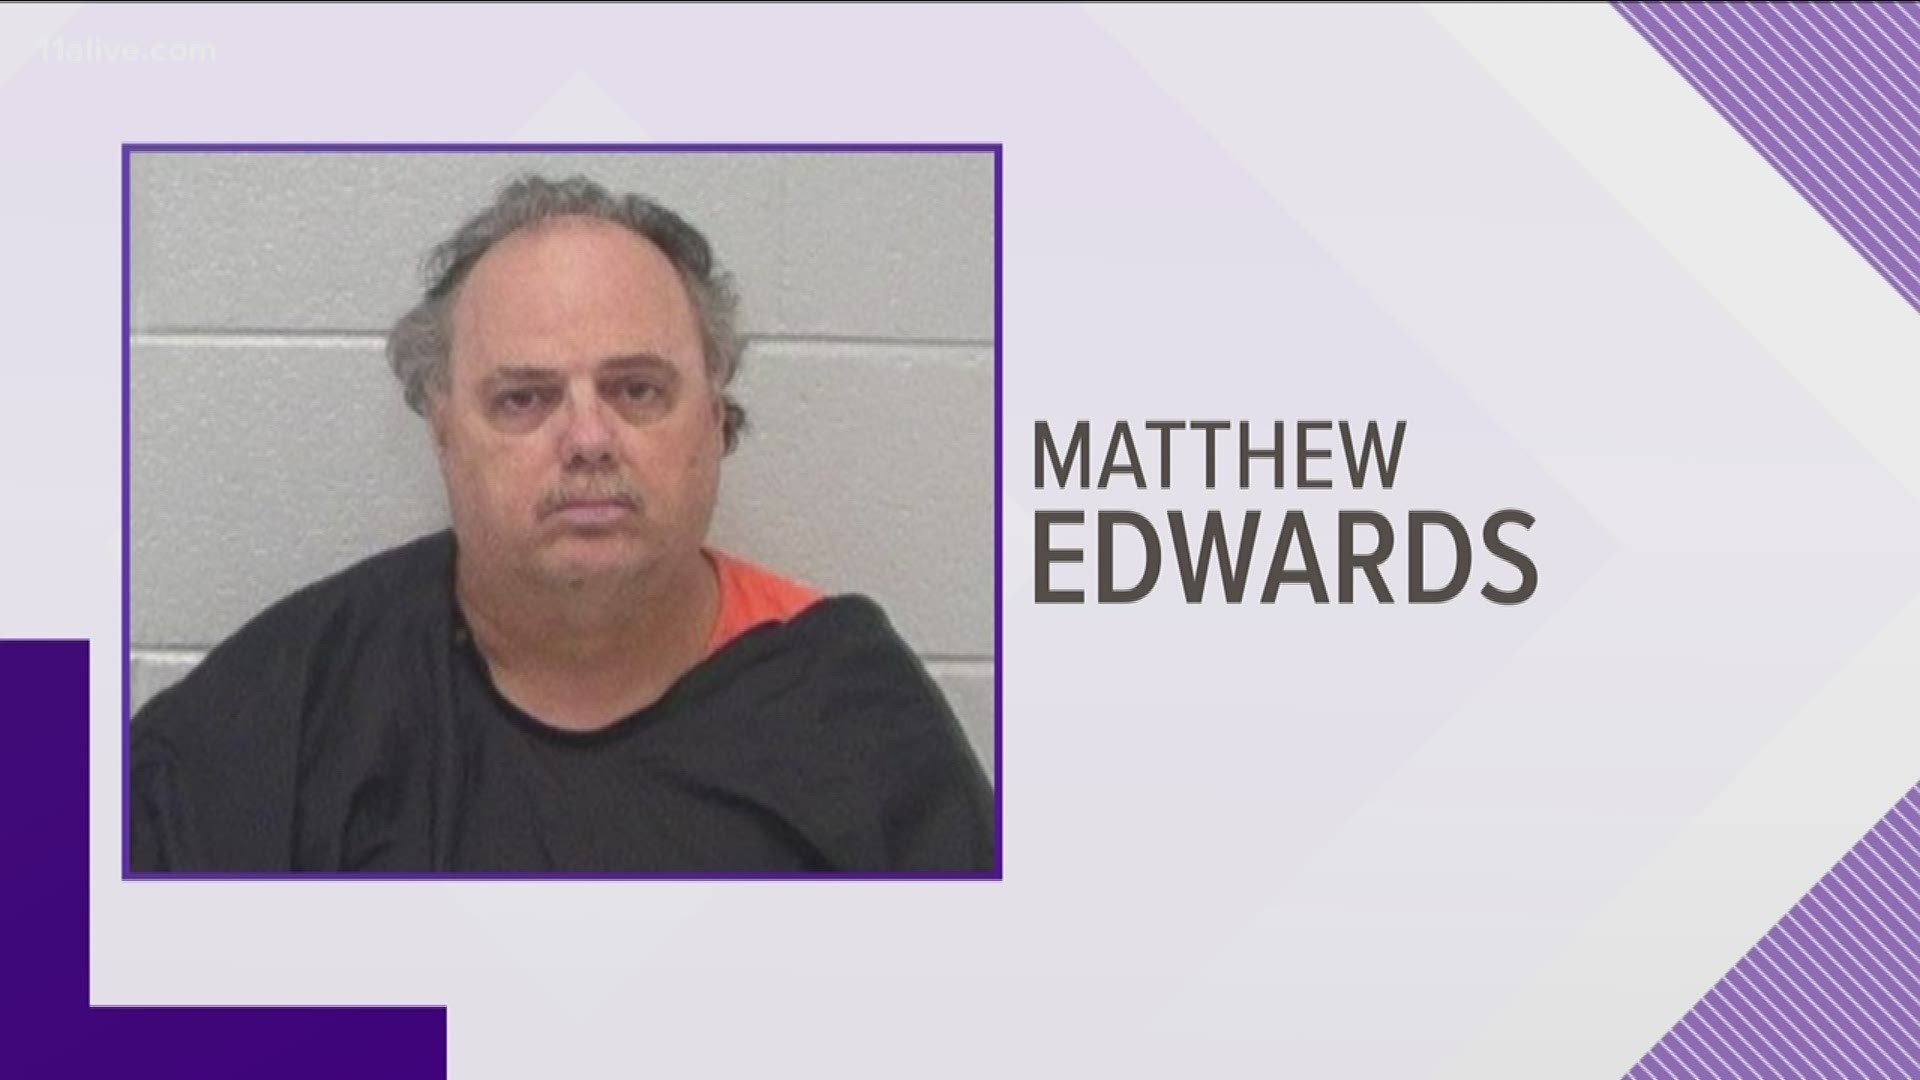 Investigators said Matthew Edwards sent the victims messages and, on one occasion physically harmed the child.